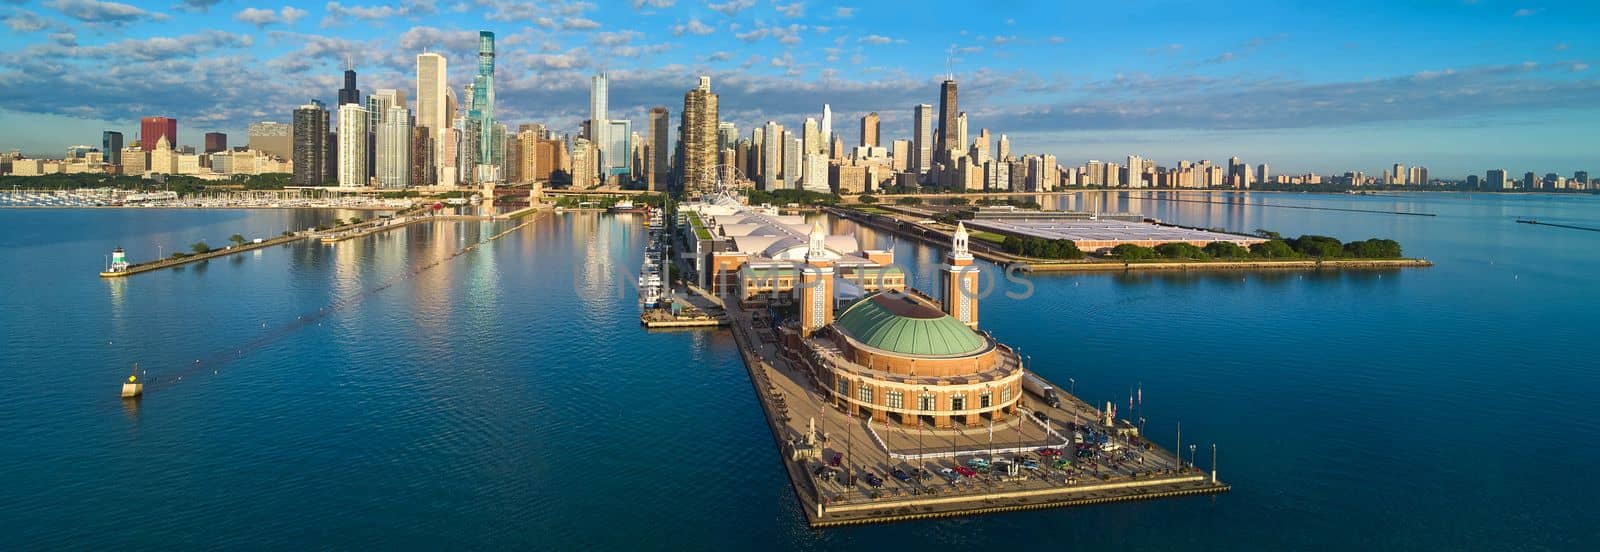 Stunning panorama of entire Navy Pier on Lake Michigan in Chicago with skyline during morning light by njproductions